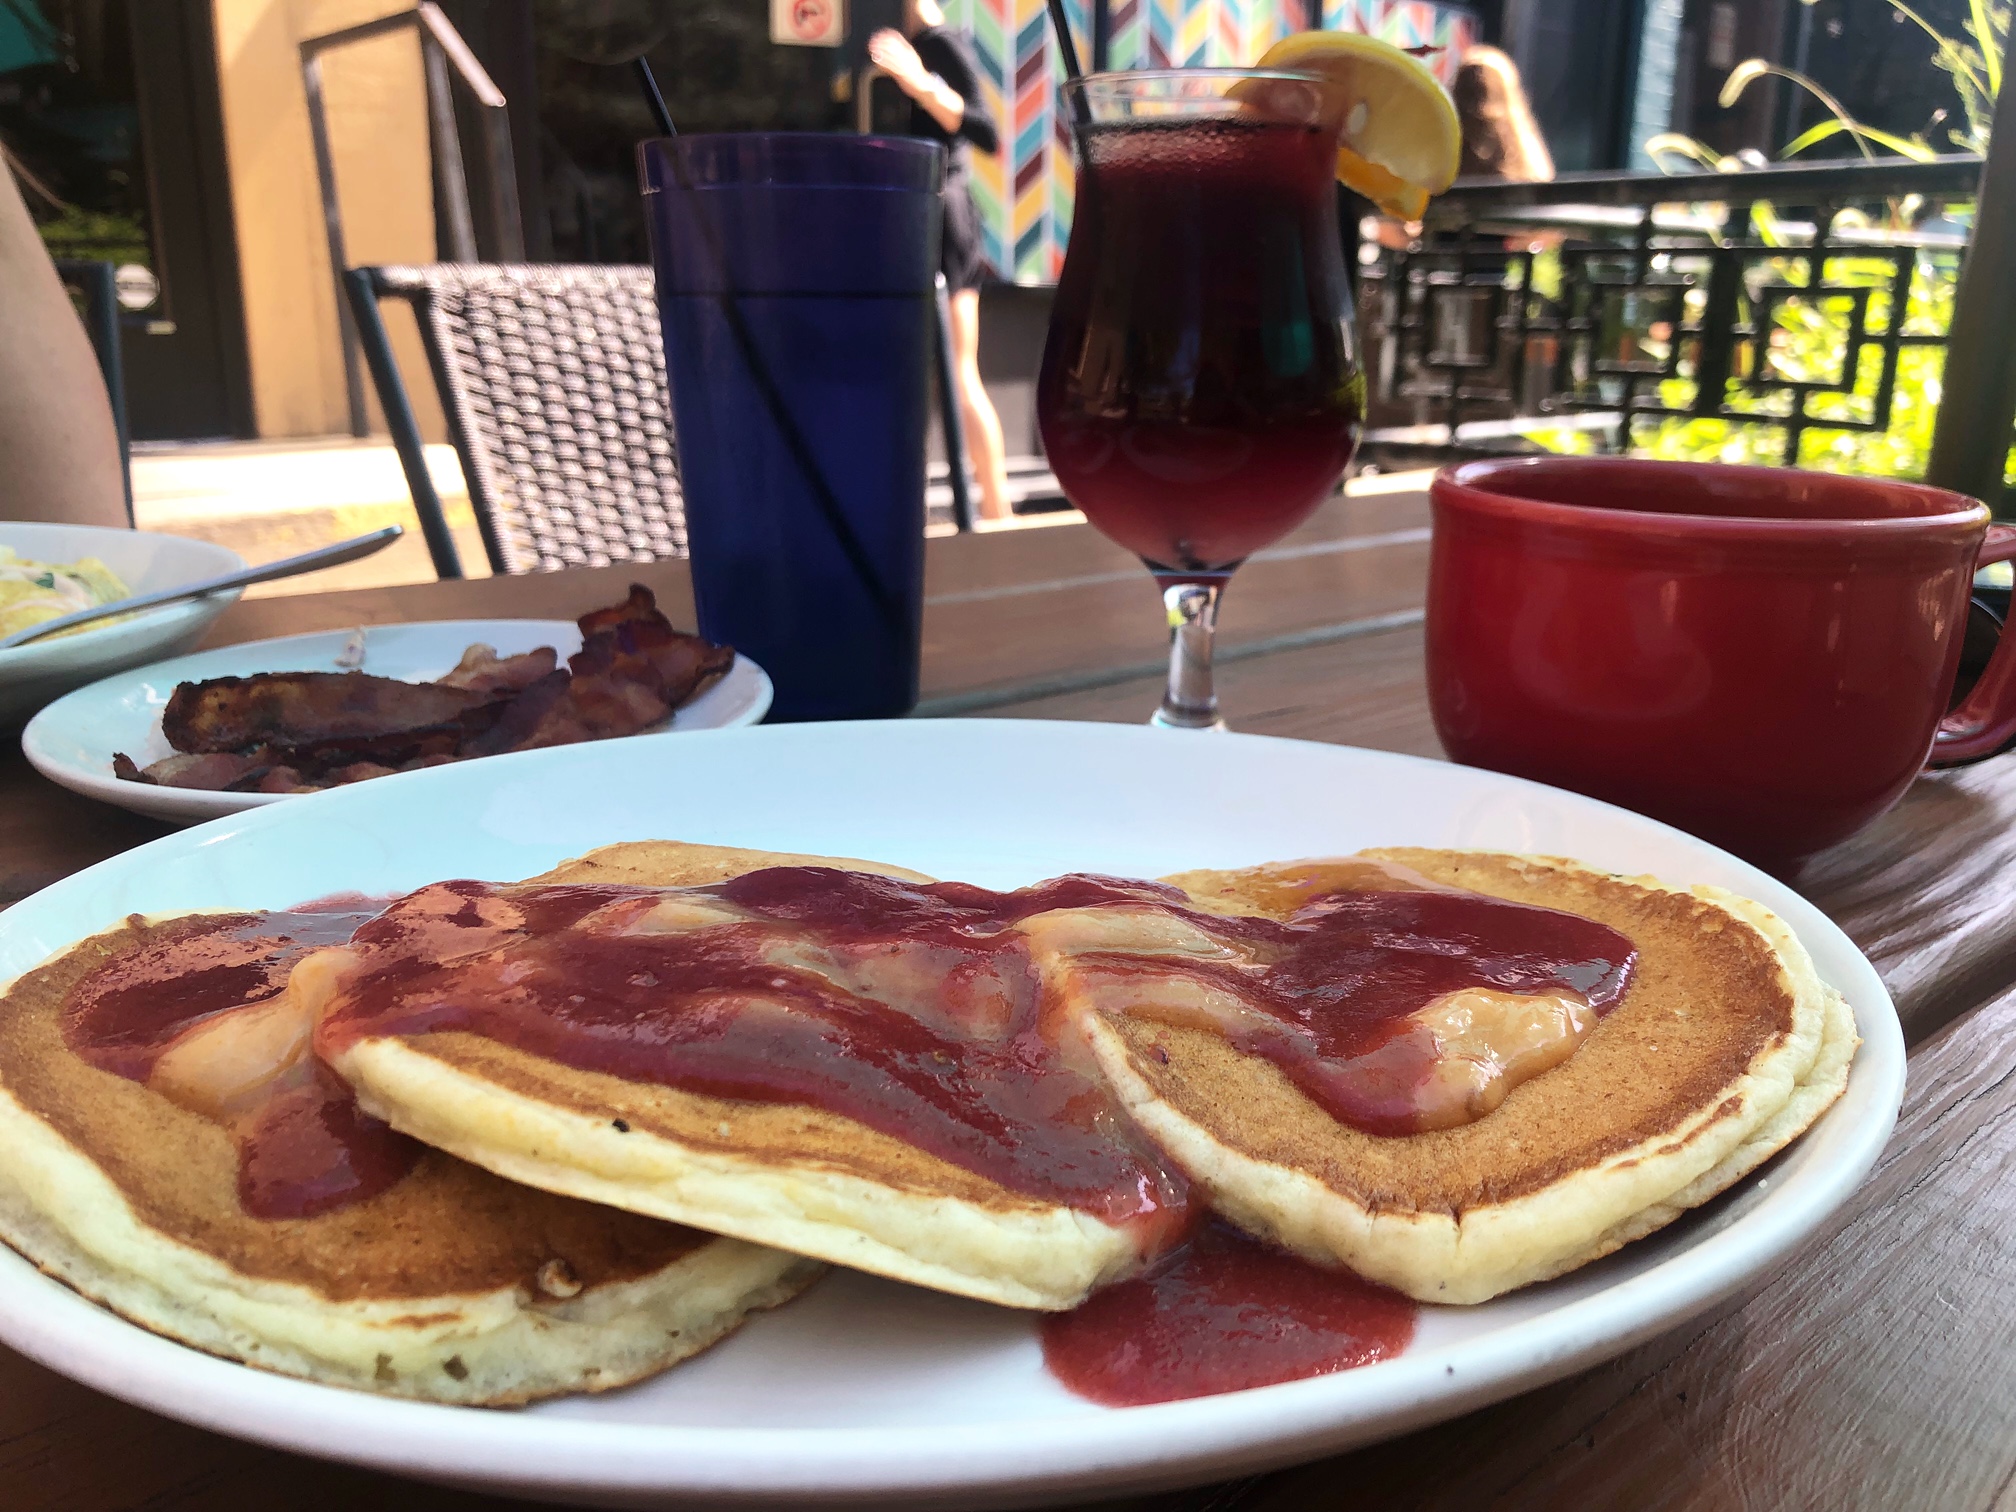 On a brown picnic table at the patio of Cowboy Monkey, there is a white plate with three pancakes on it. The pancakes have a dark pink syrup and a melting yellow butter. There is a hurricane glass of red sangria and a red mug of coffee behind the white plate of pancakes. Photo by Alyssa Buckley.